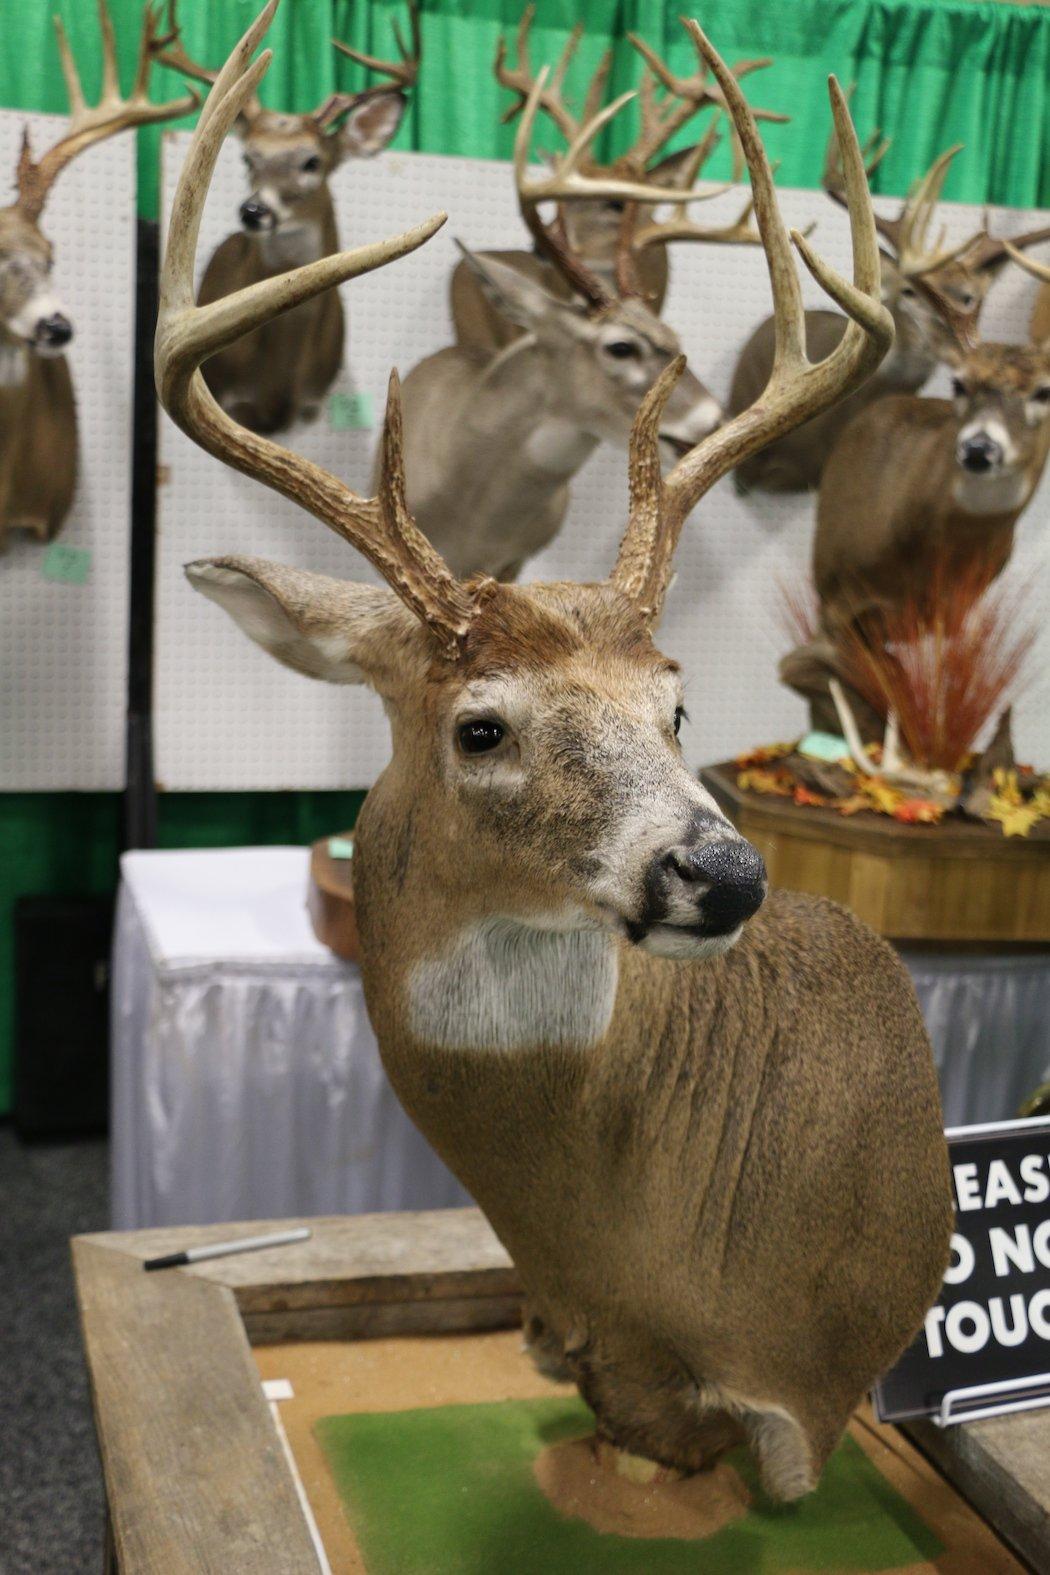 8-Point Buck with Ears Pinned